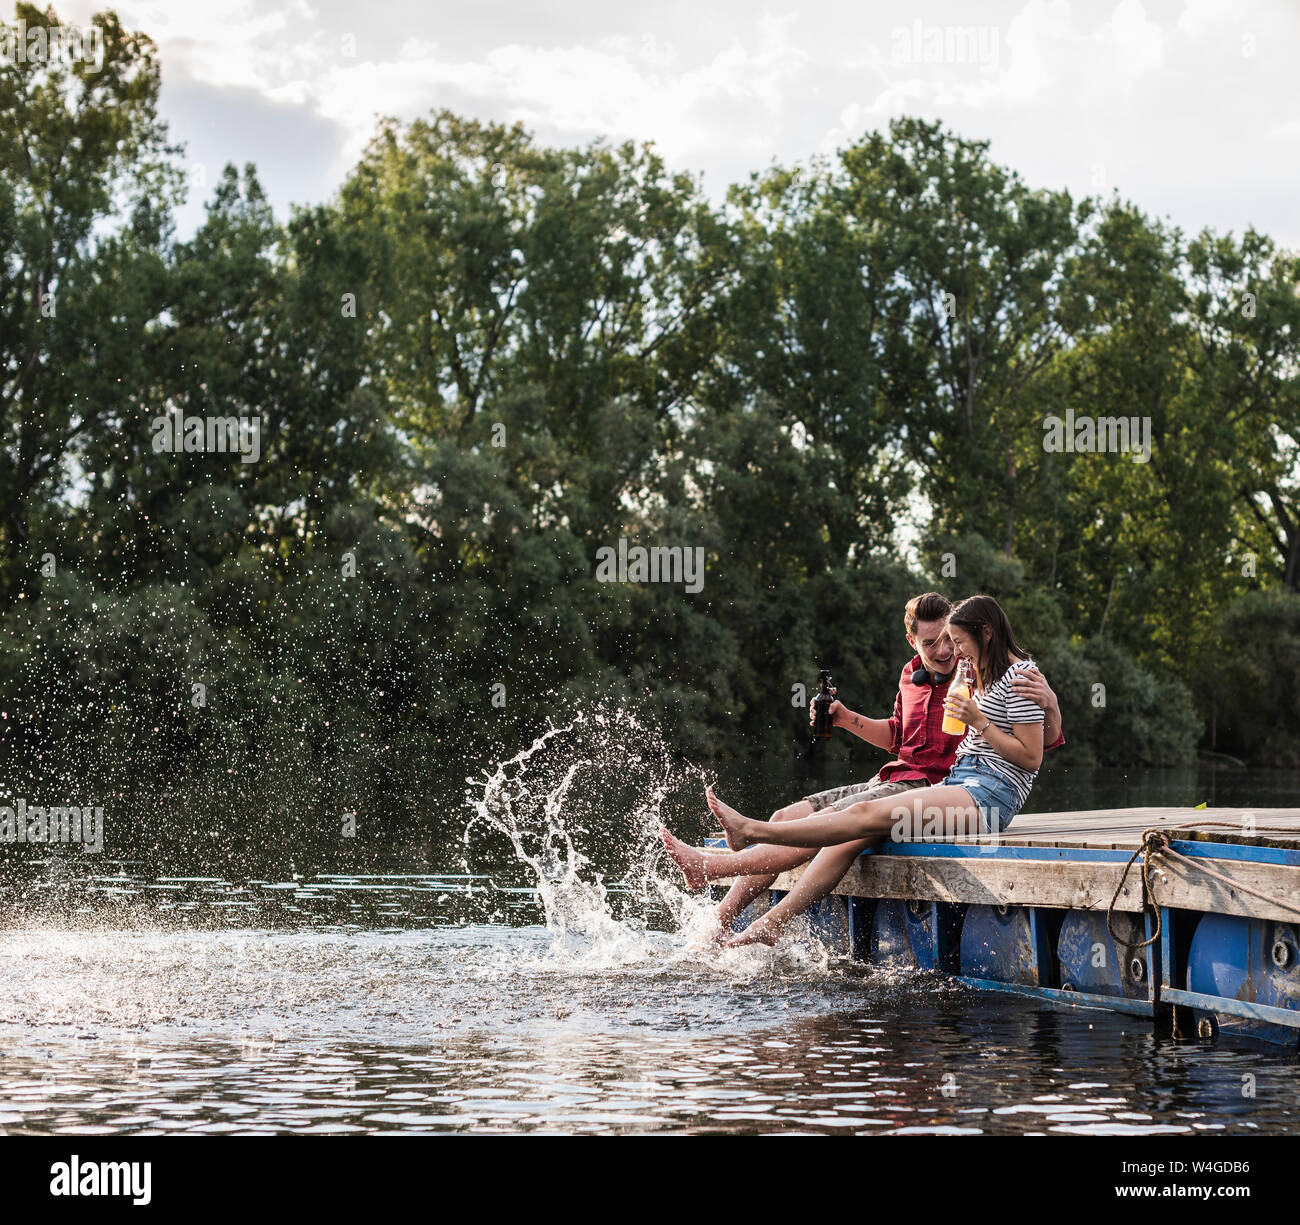 Young couple having a drink and splashing with water on jetty at a remote lake Stock Photo